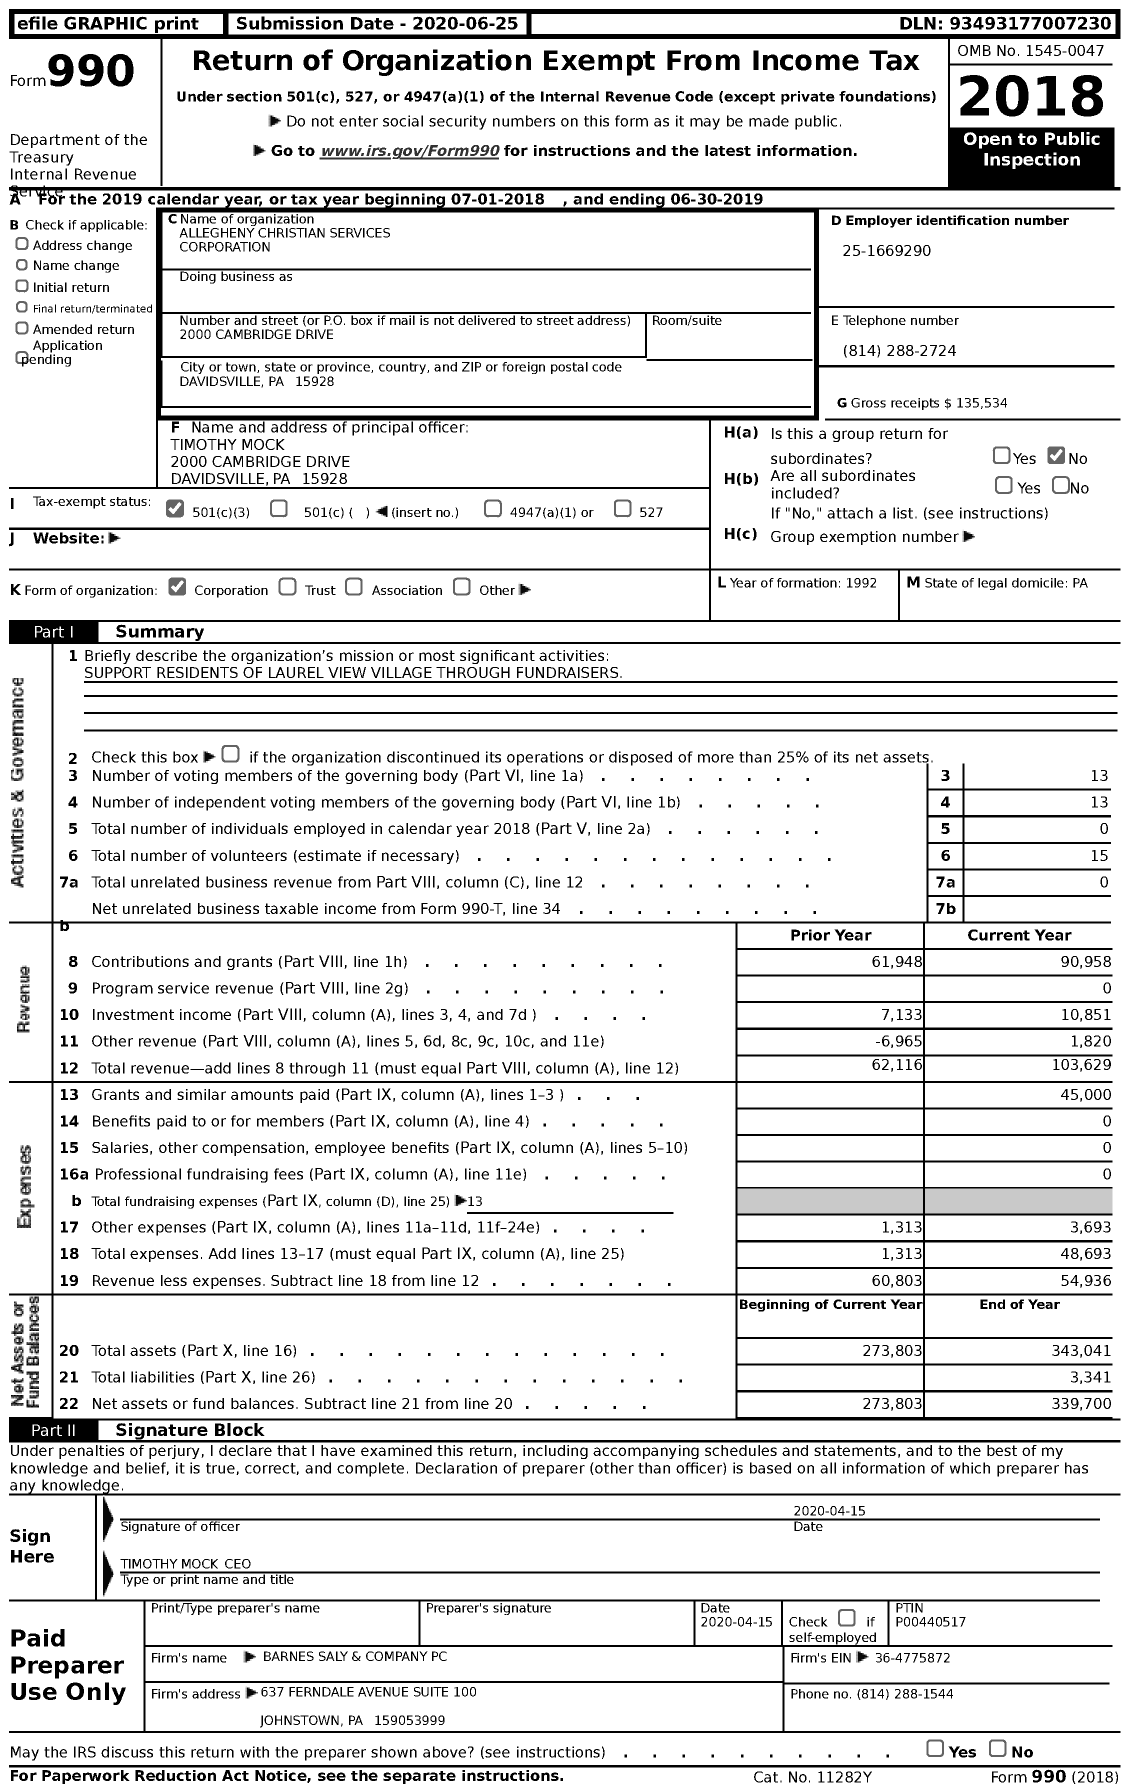 Image of first page of 2018 Form 990 for Allegheny Christian Services Corporation